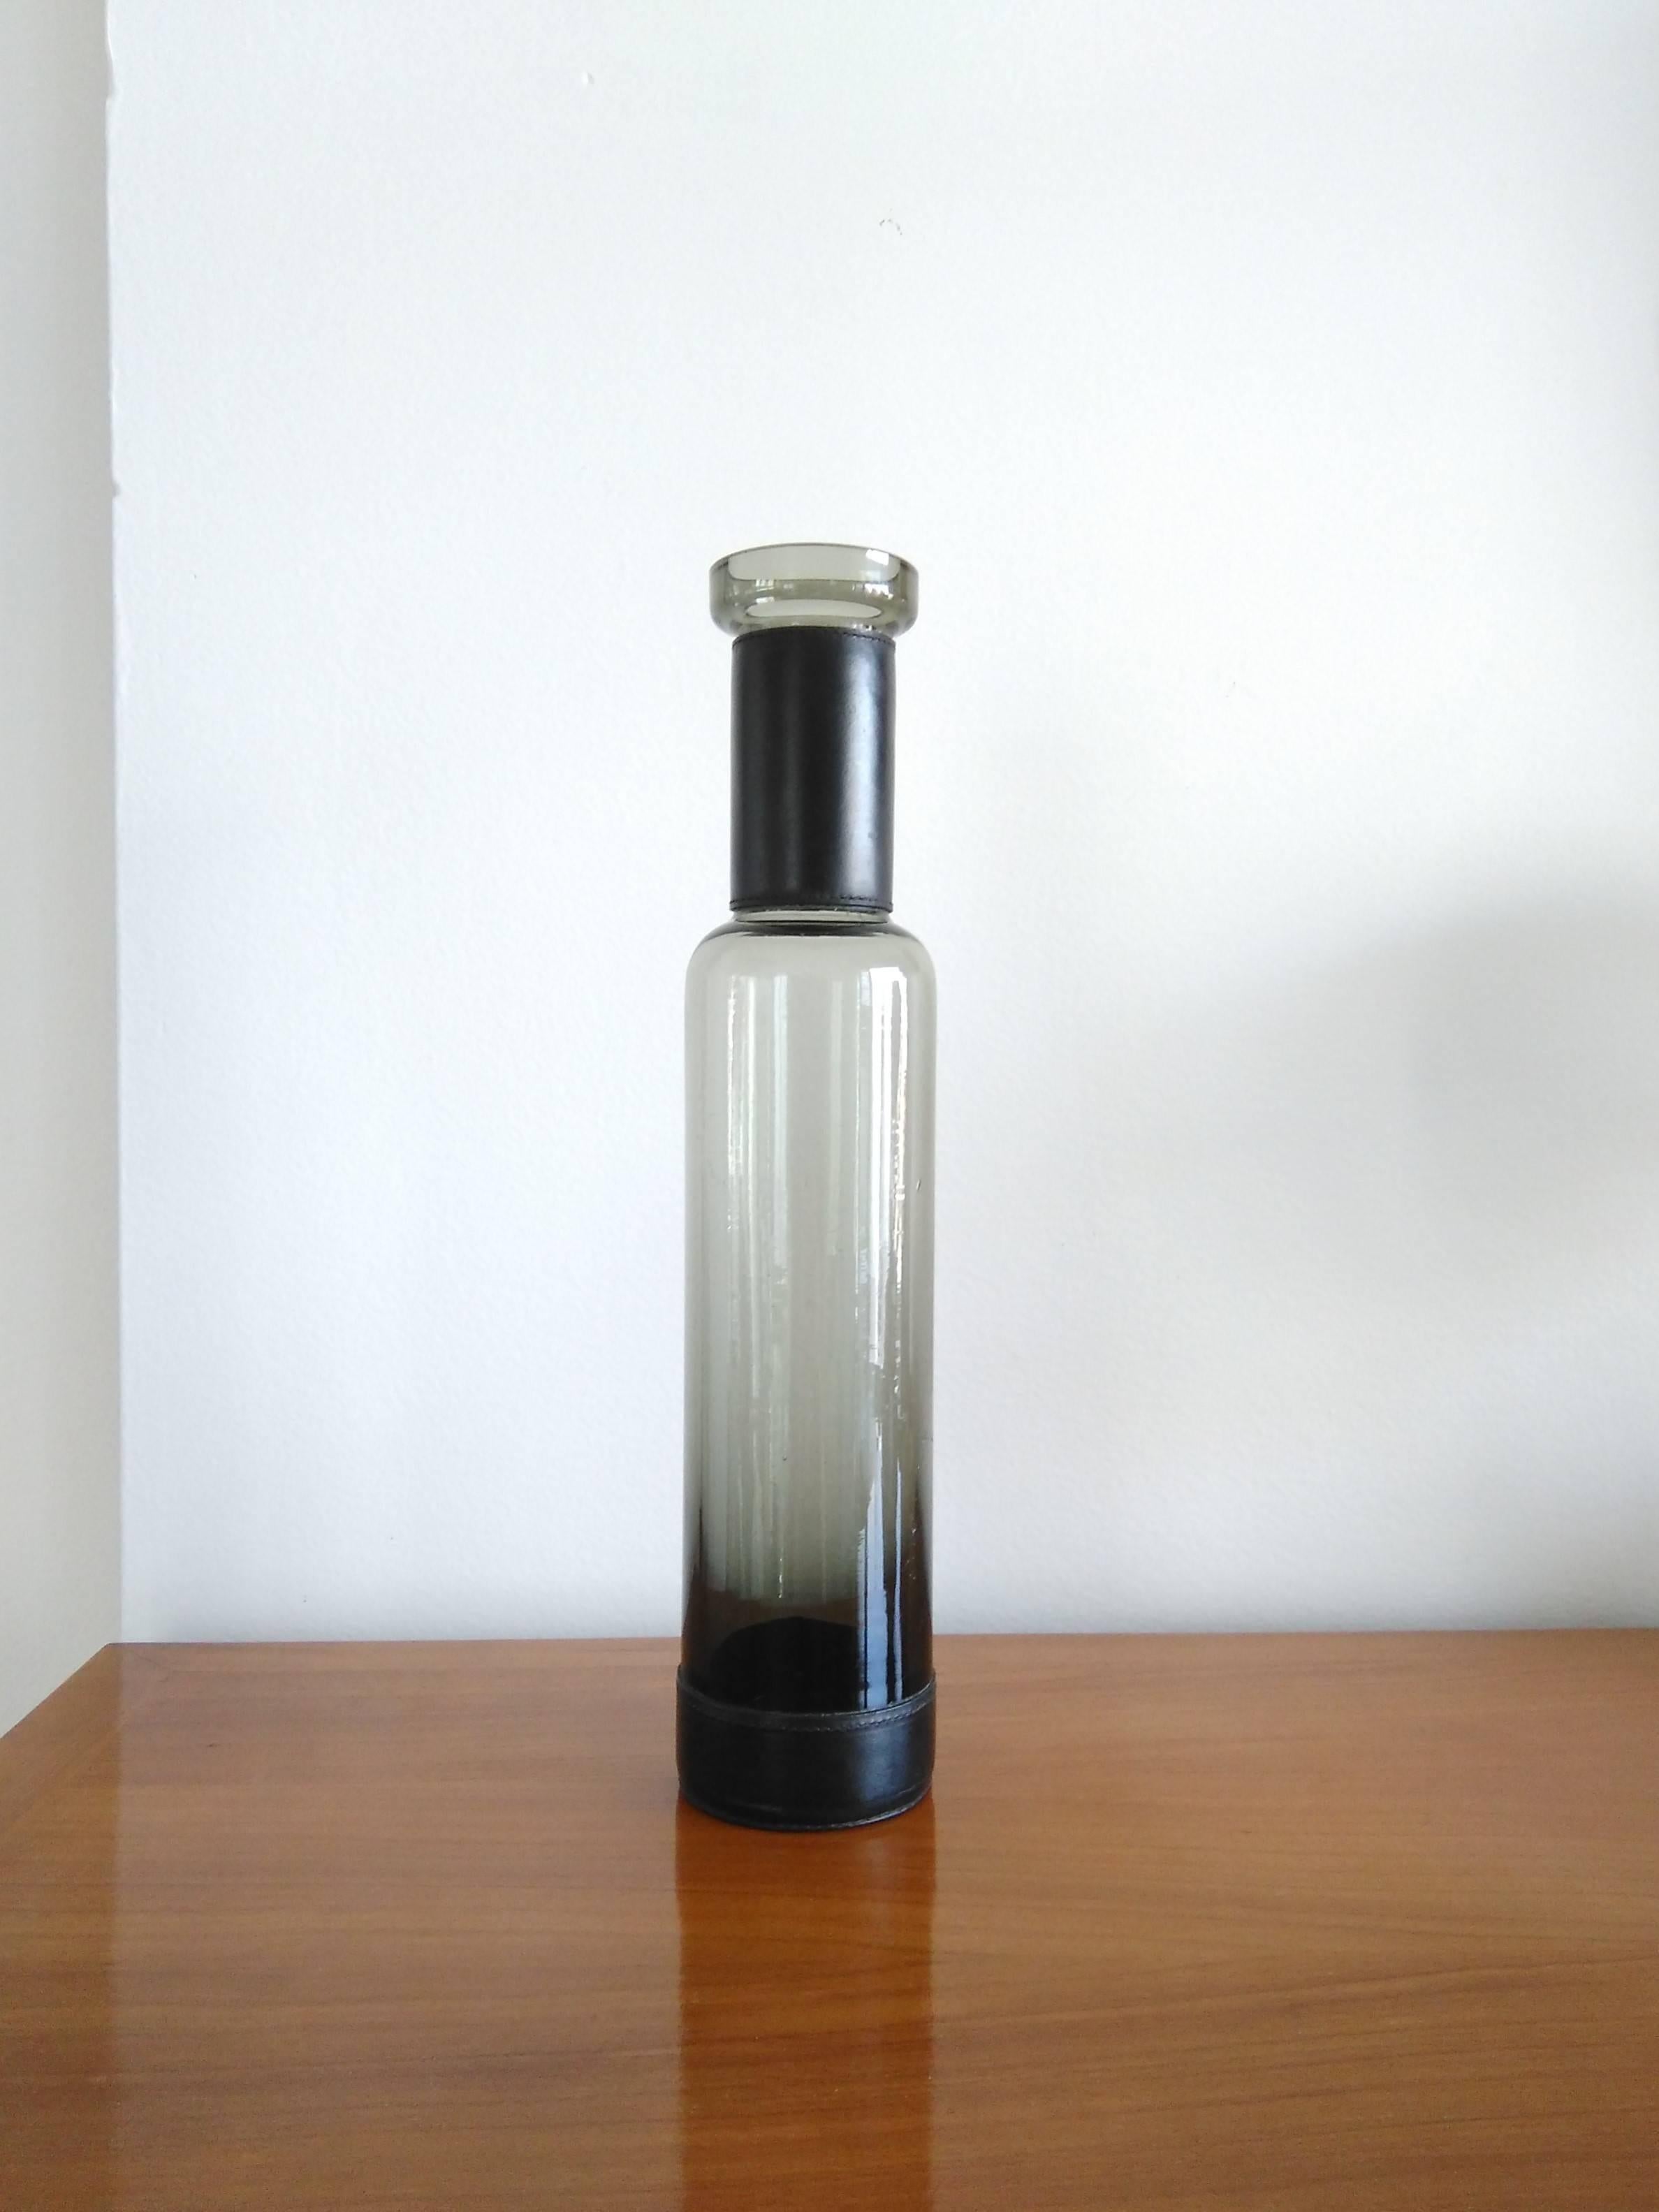 Sfumato effect thick glass bottle
leather details
this item will ship from France
price does not include handling, shipping and possible customs related charges.